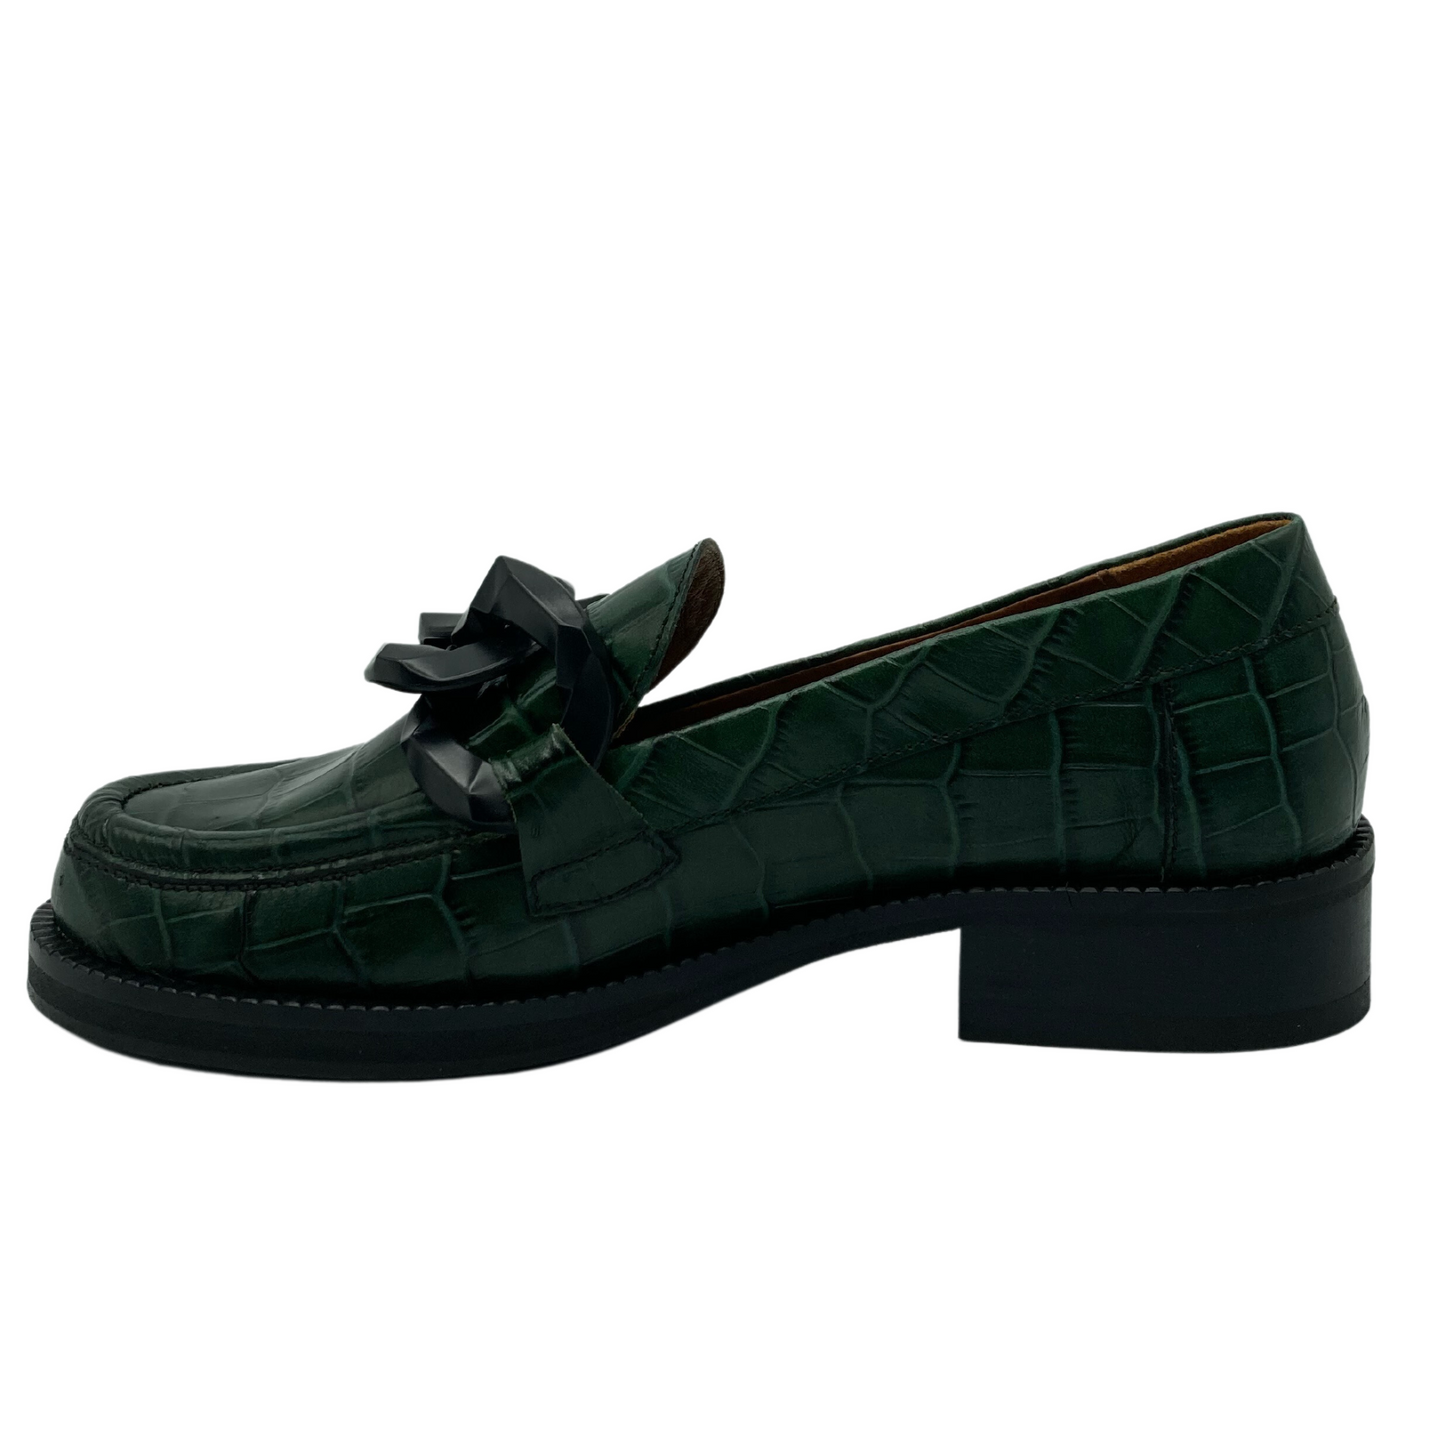 Left facing view of textured green leather loafer with short block heel and black outsole